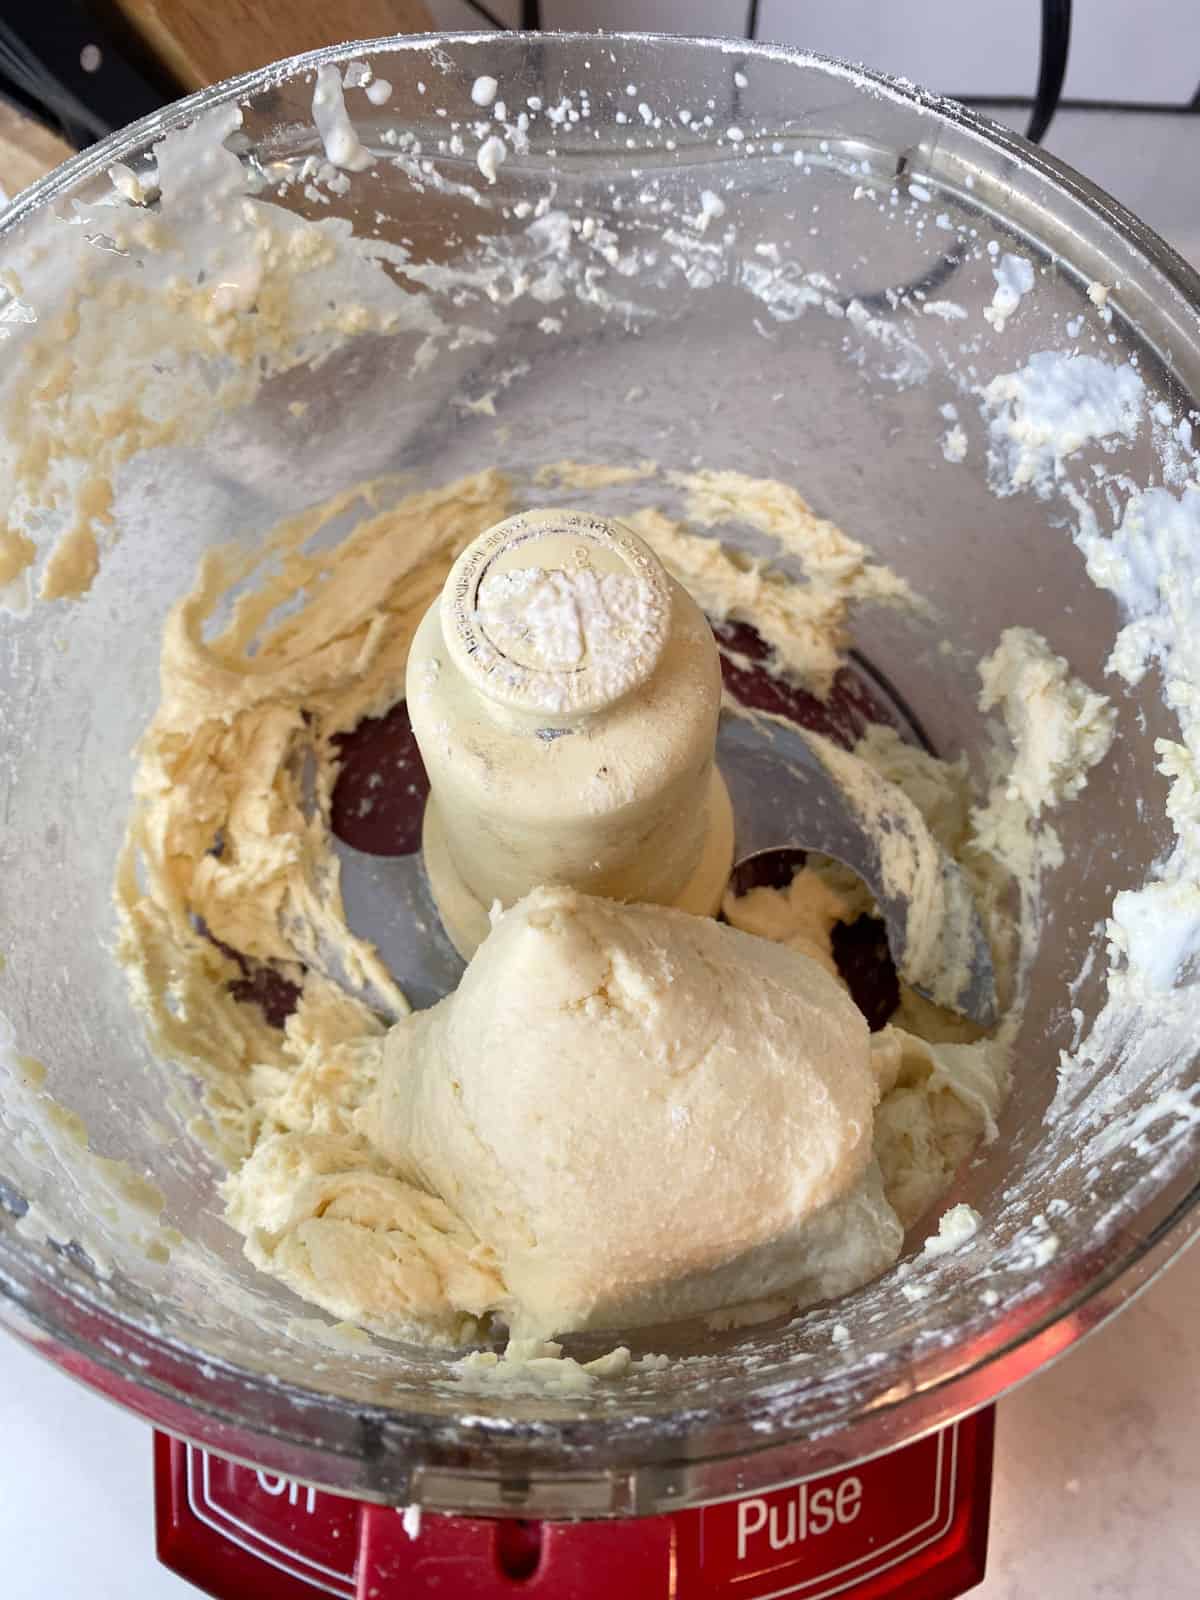 Mix the galette dough in a food processor until dough forms.